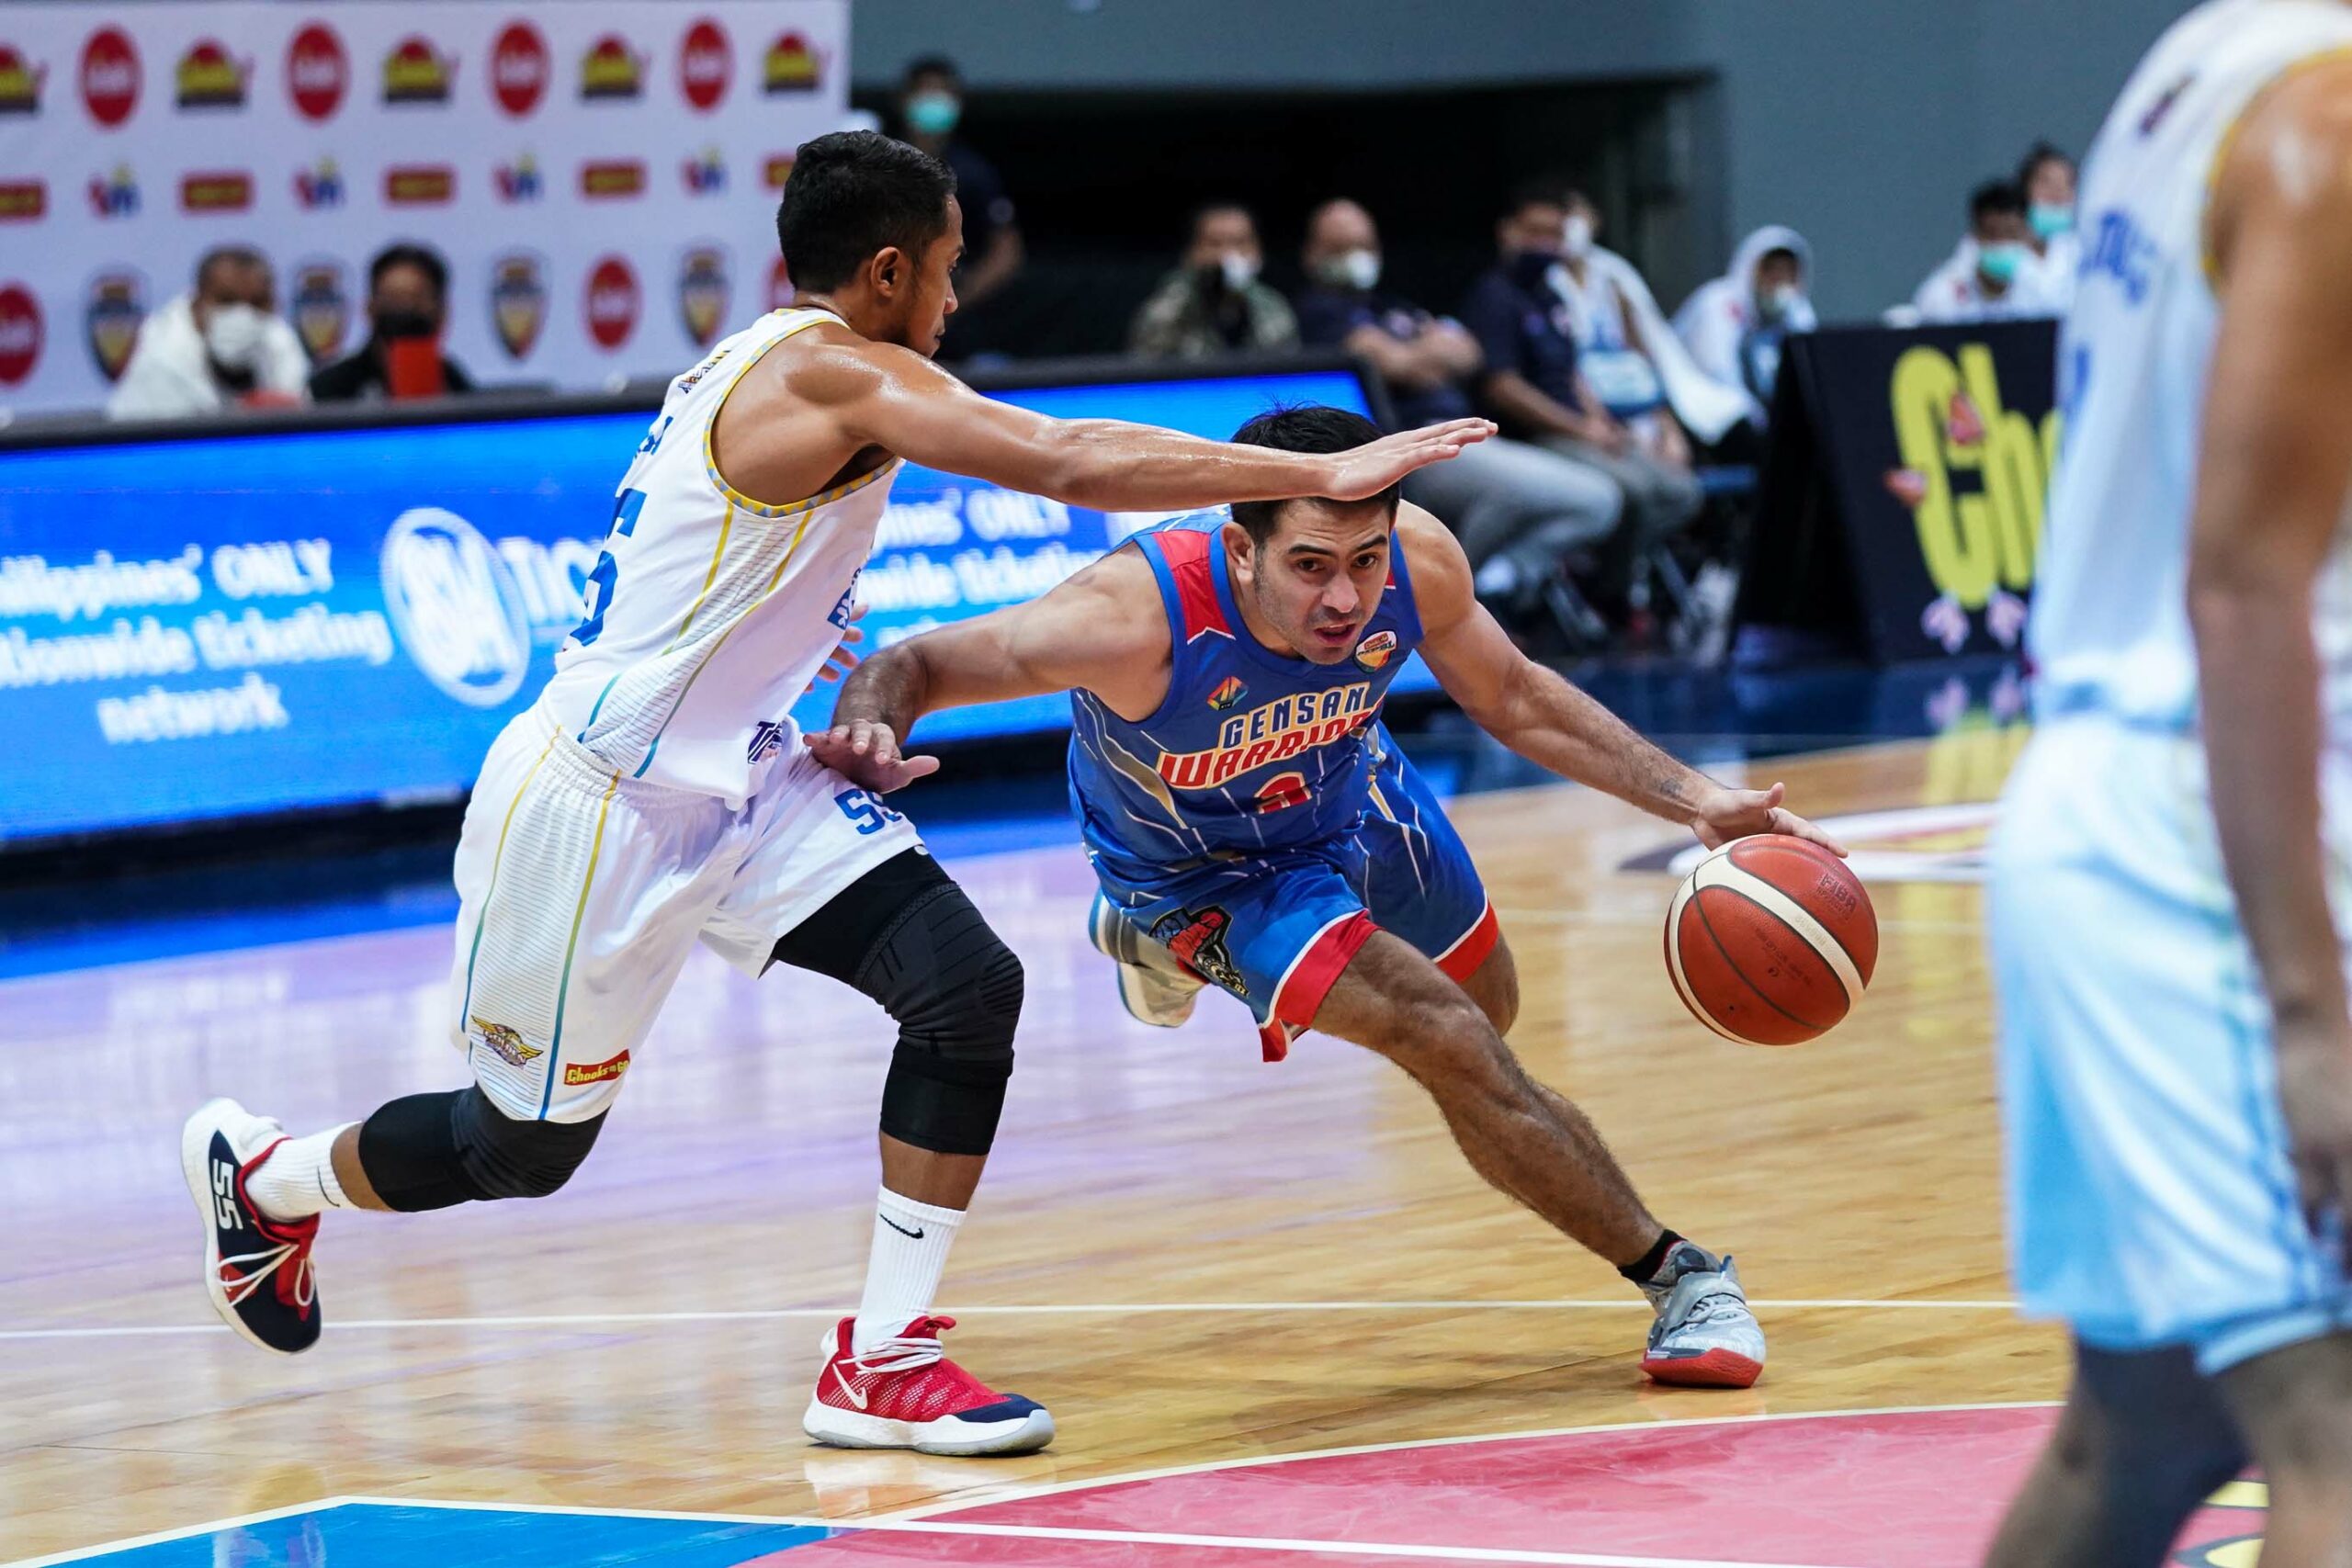 2021-Chooks-MPBL-Mindoro-vs-GenSan-Gerald-Anderson-scaled Gerald Anderson relishes representing hometown GenSan in MPBL Basketball MPBL News  - philippine sports news